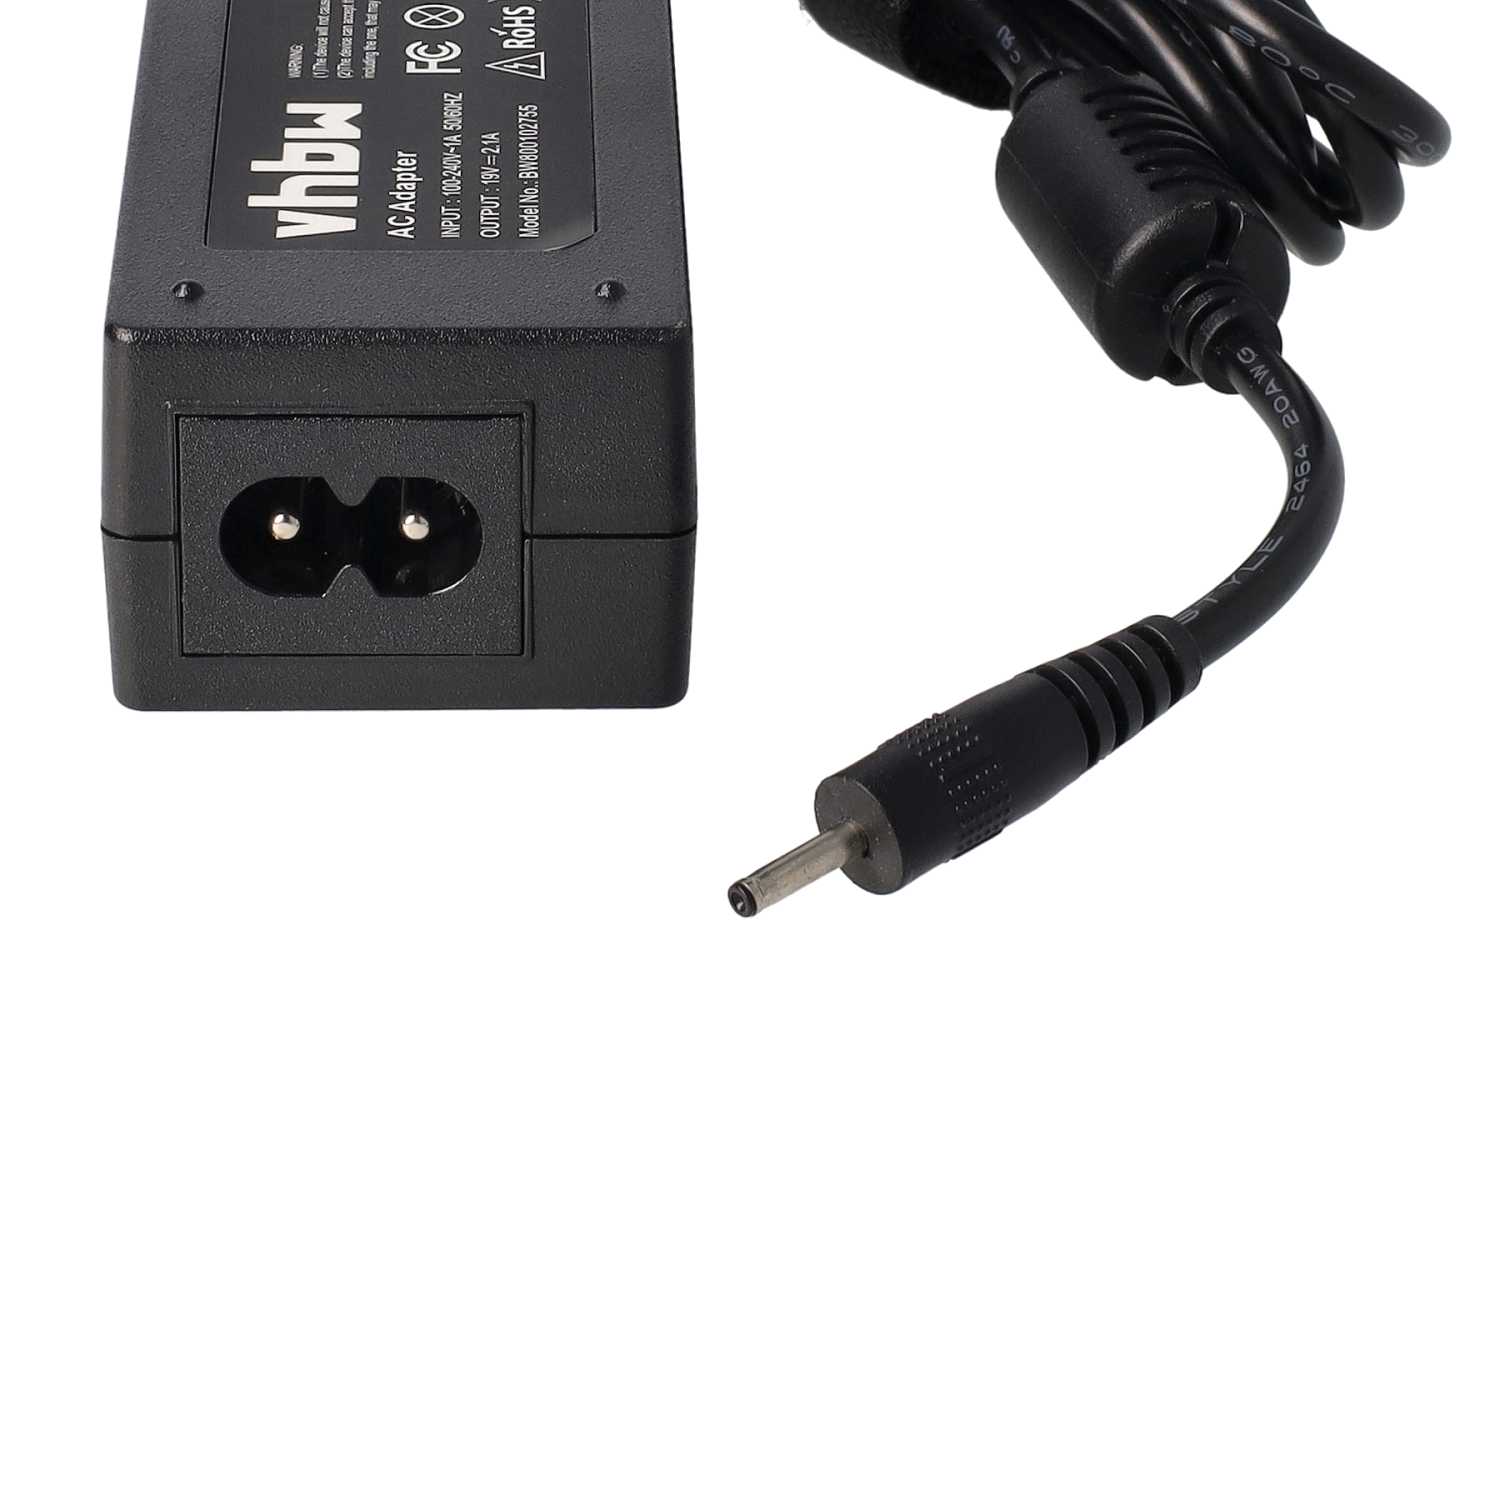 Mains Power Adapter replaces Asus AD6630, 90-XB02OAPW00100Q, ADP-40PH AB, ADP-40HH for AsusNotebook, 40 W